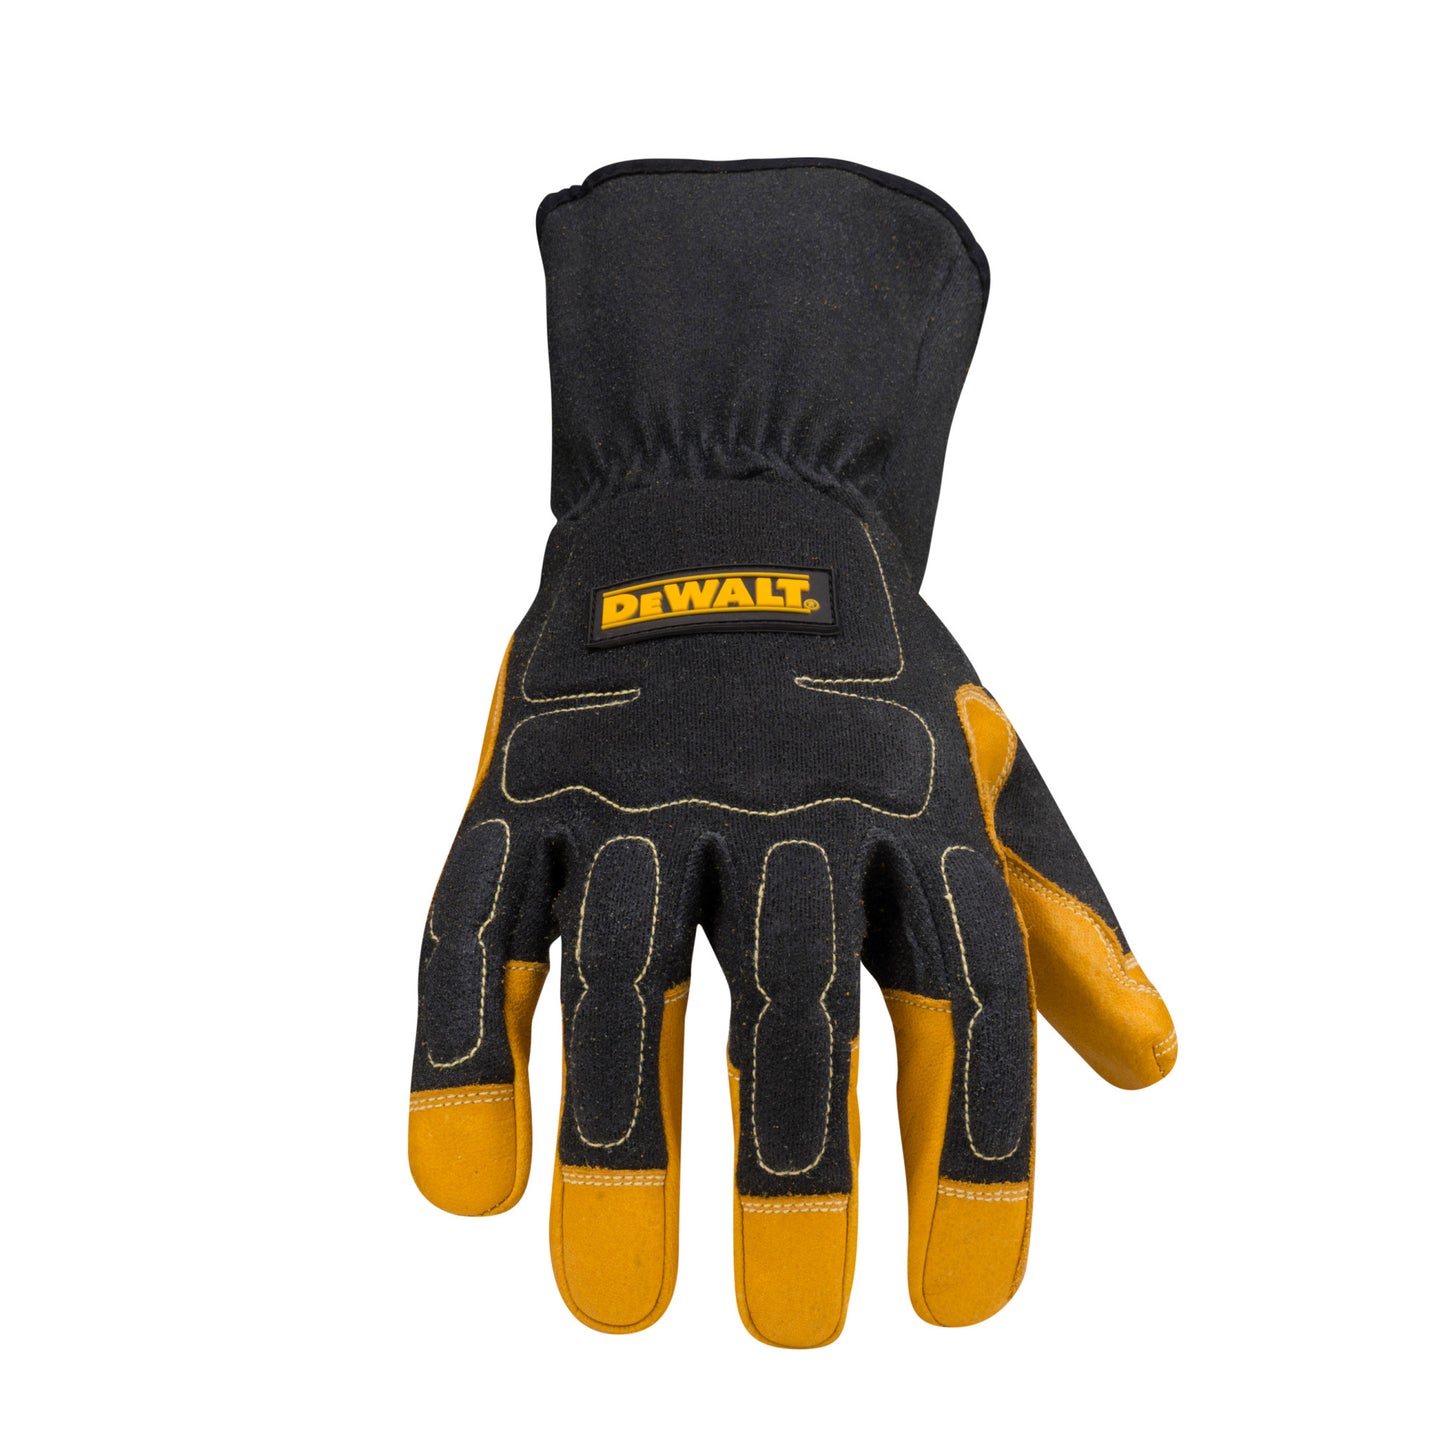 MIG and TIG Welding Gloves